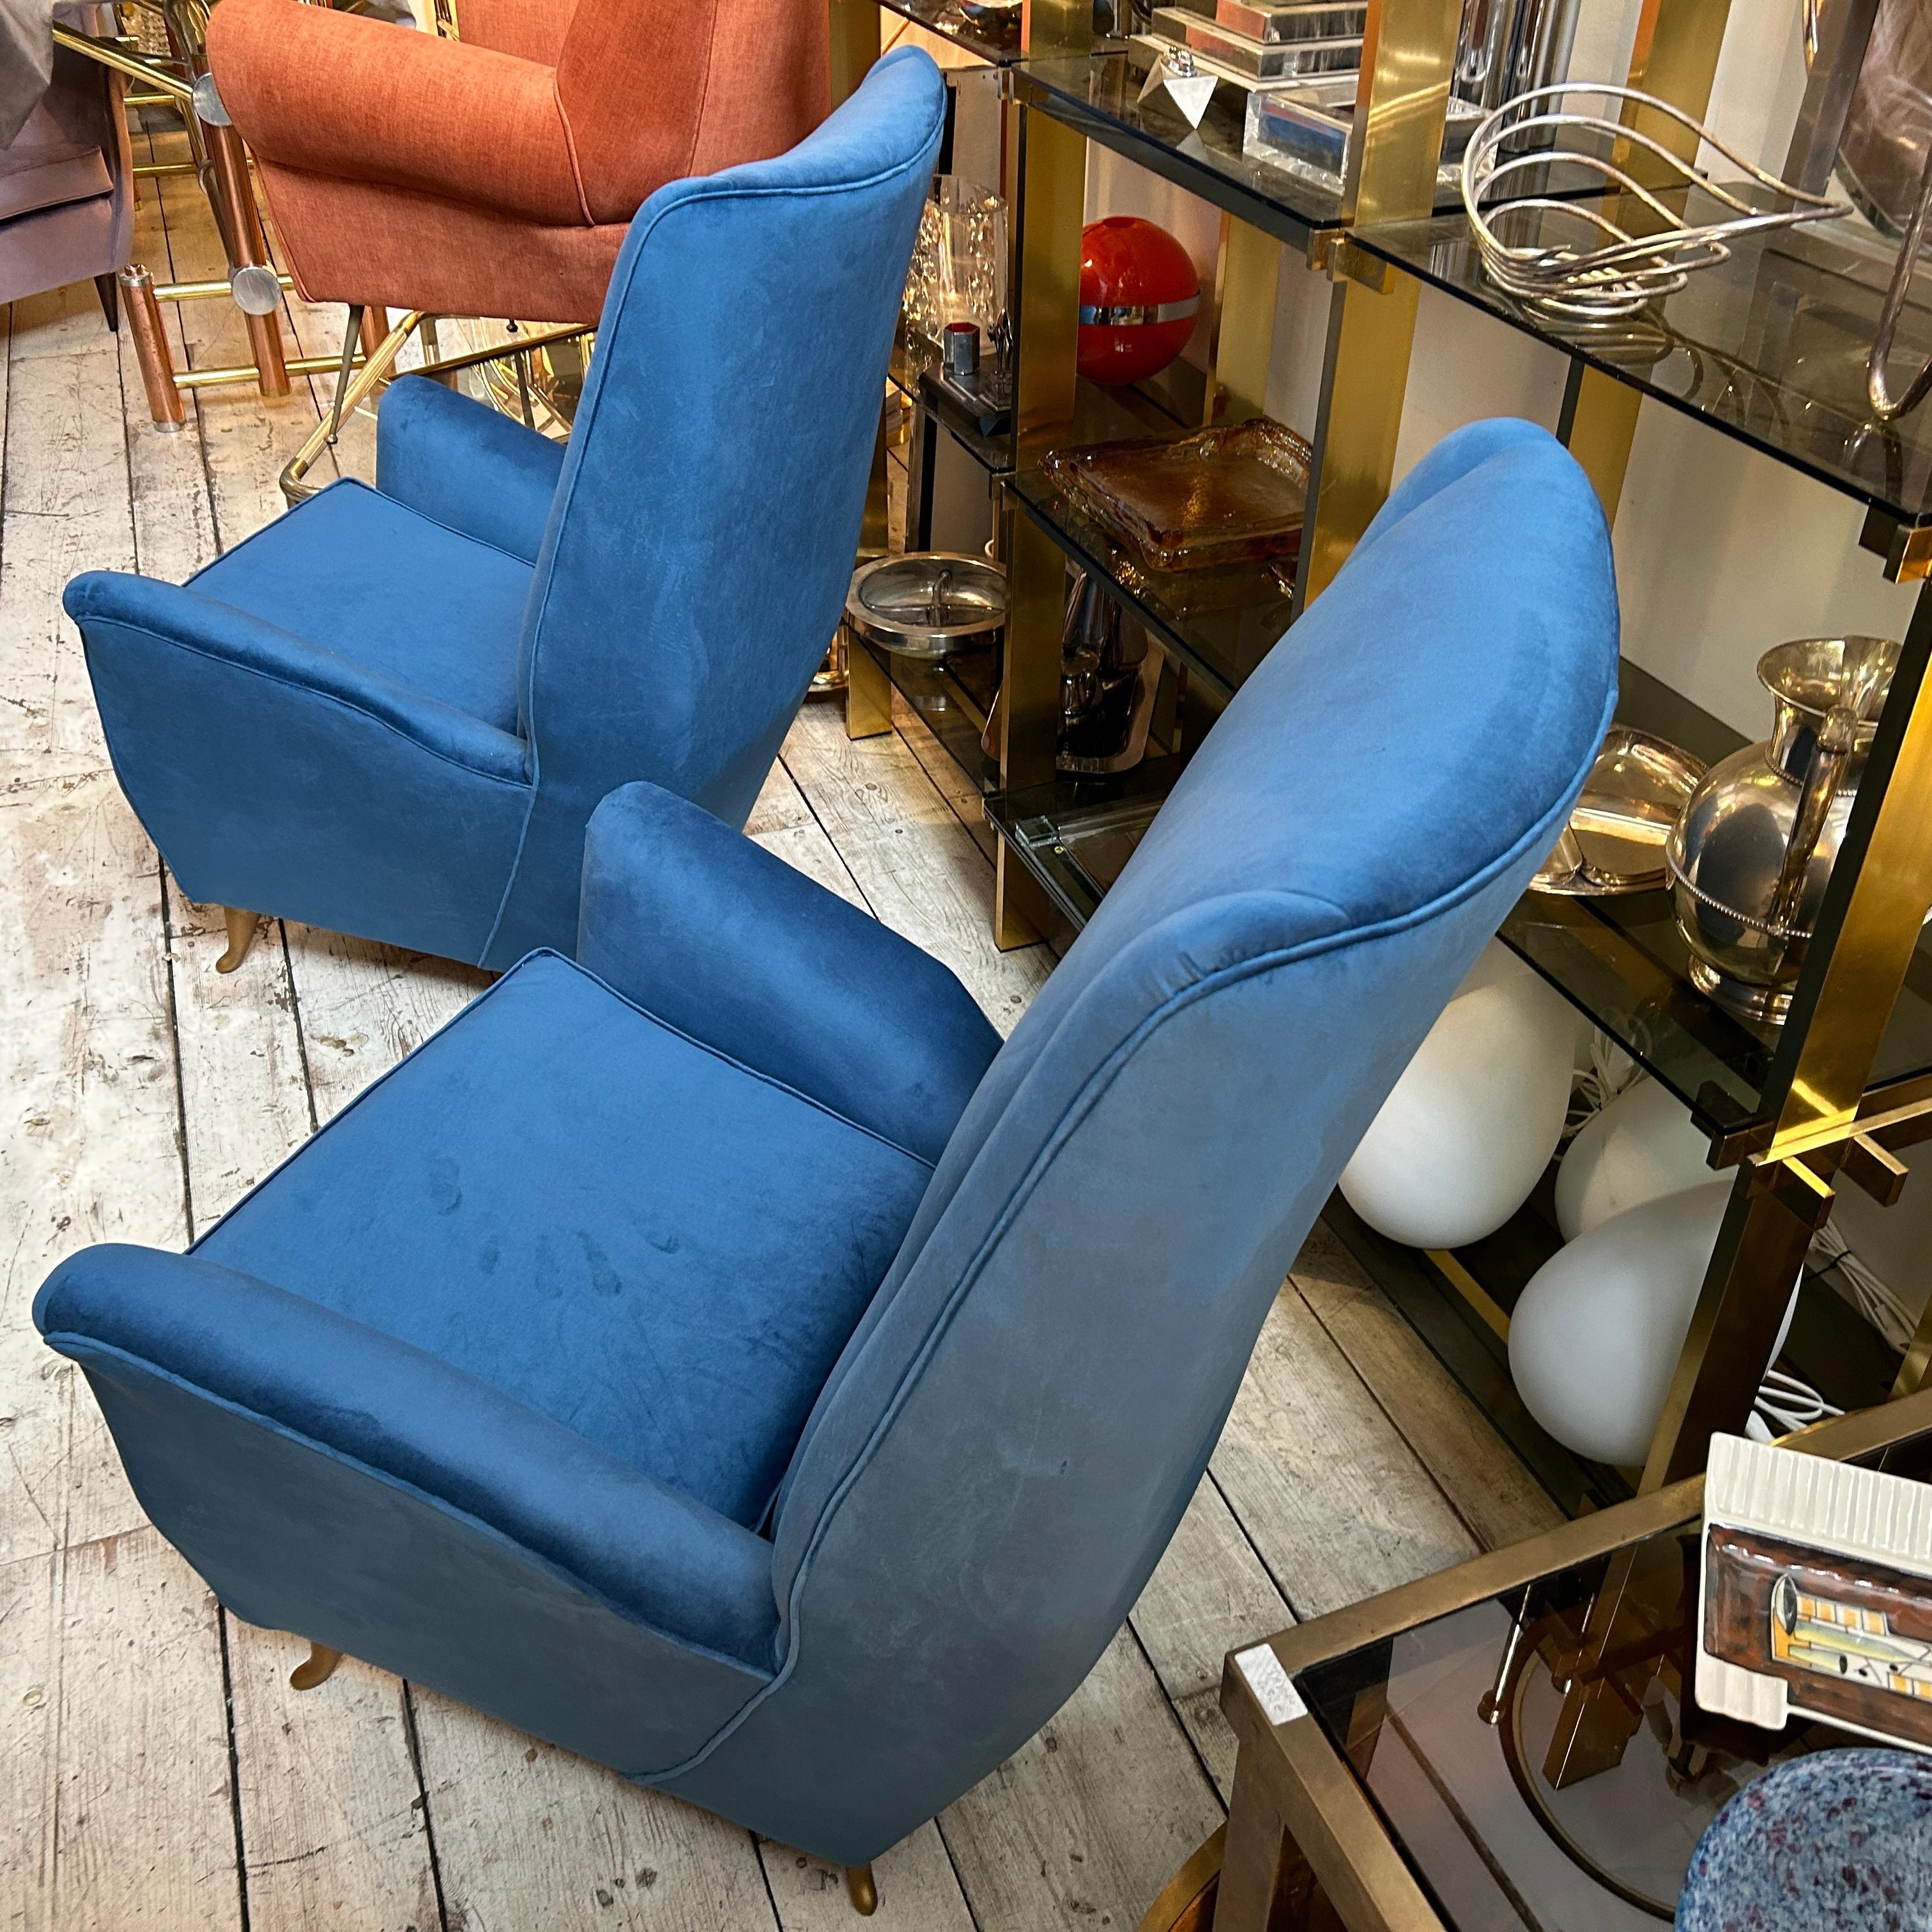 Italian 1950s Two Mid-Century Modern High Back Armchairs by Gio Ponti for Isa Bergamo